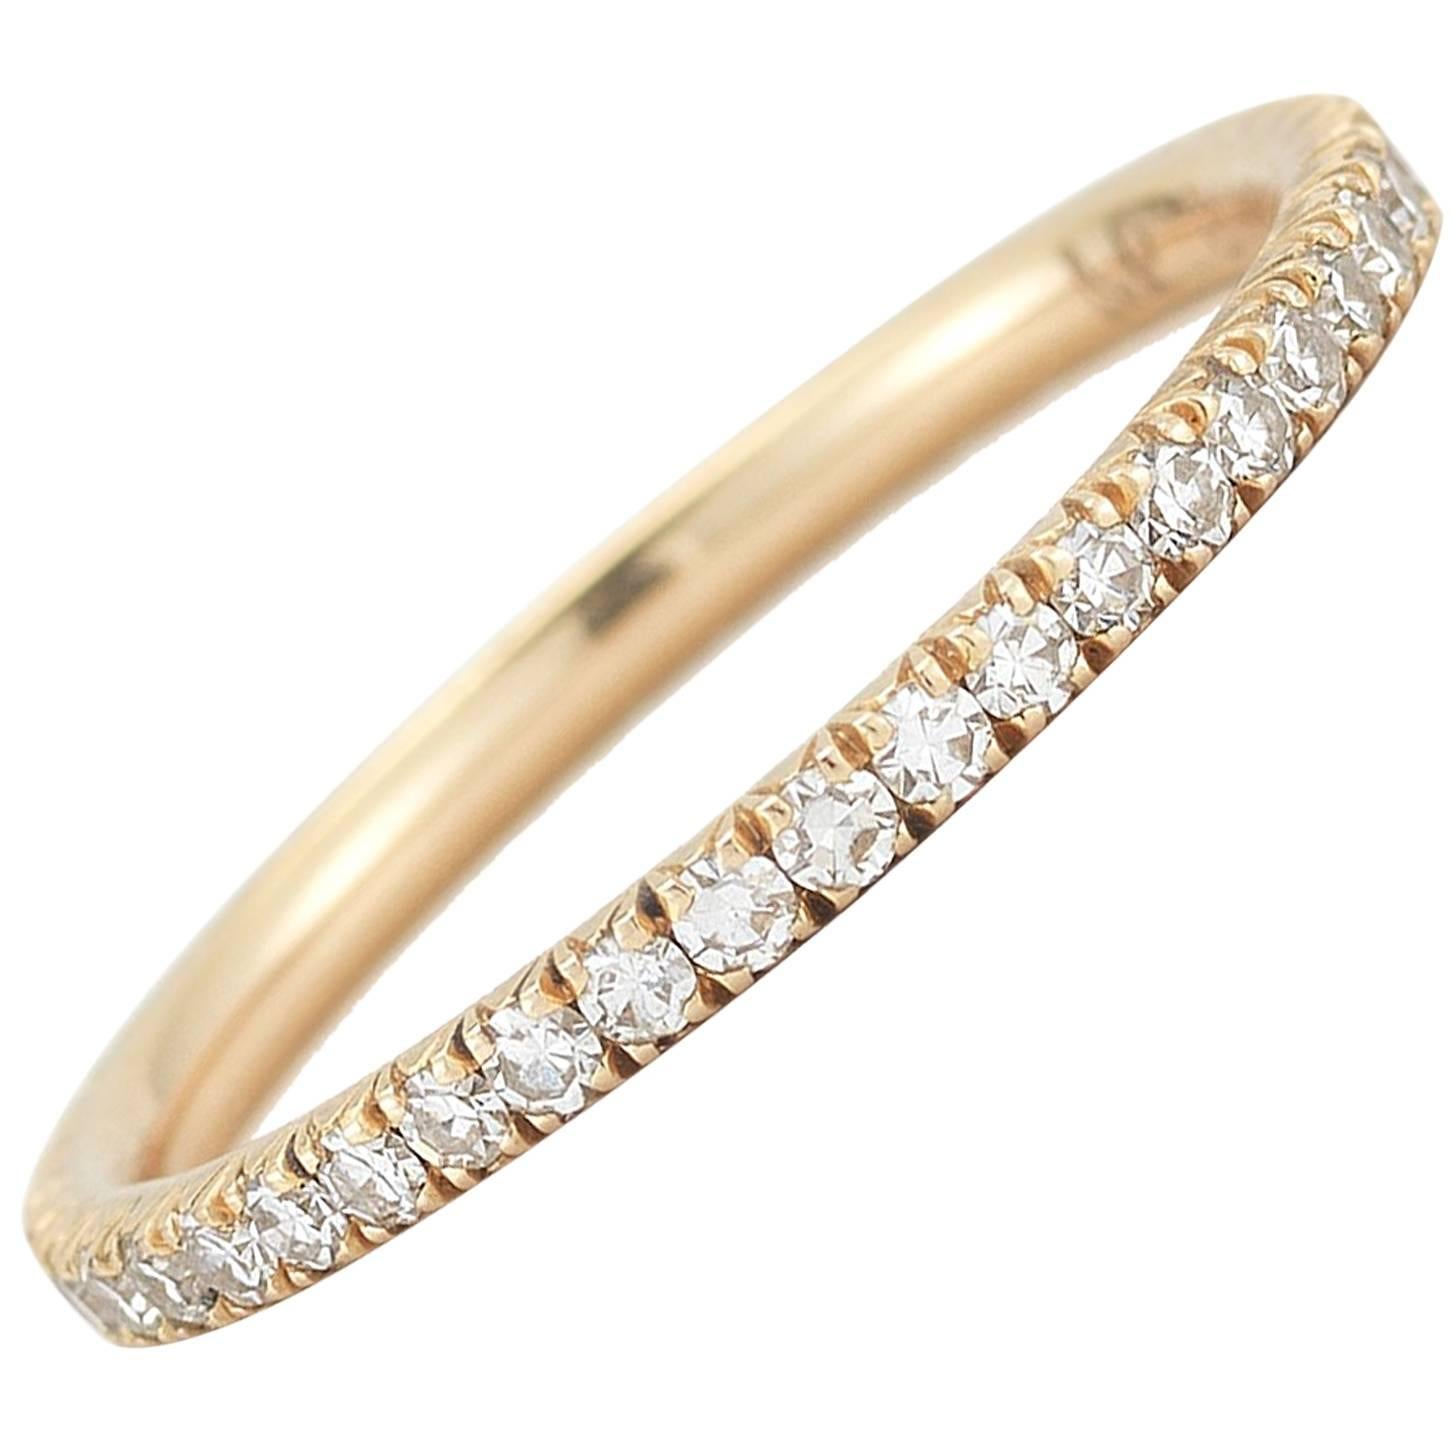 Micro Pave Eternity Band in One Point Diamonds 0.43 Carat Diamond Weight For Sale